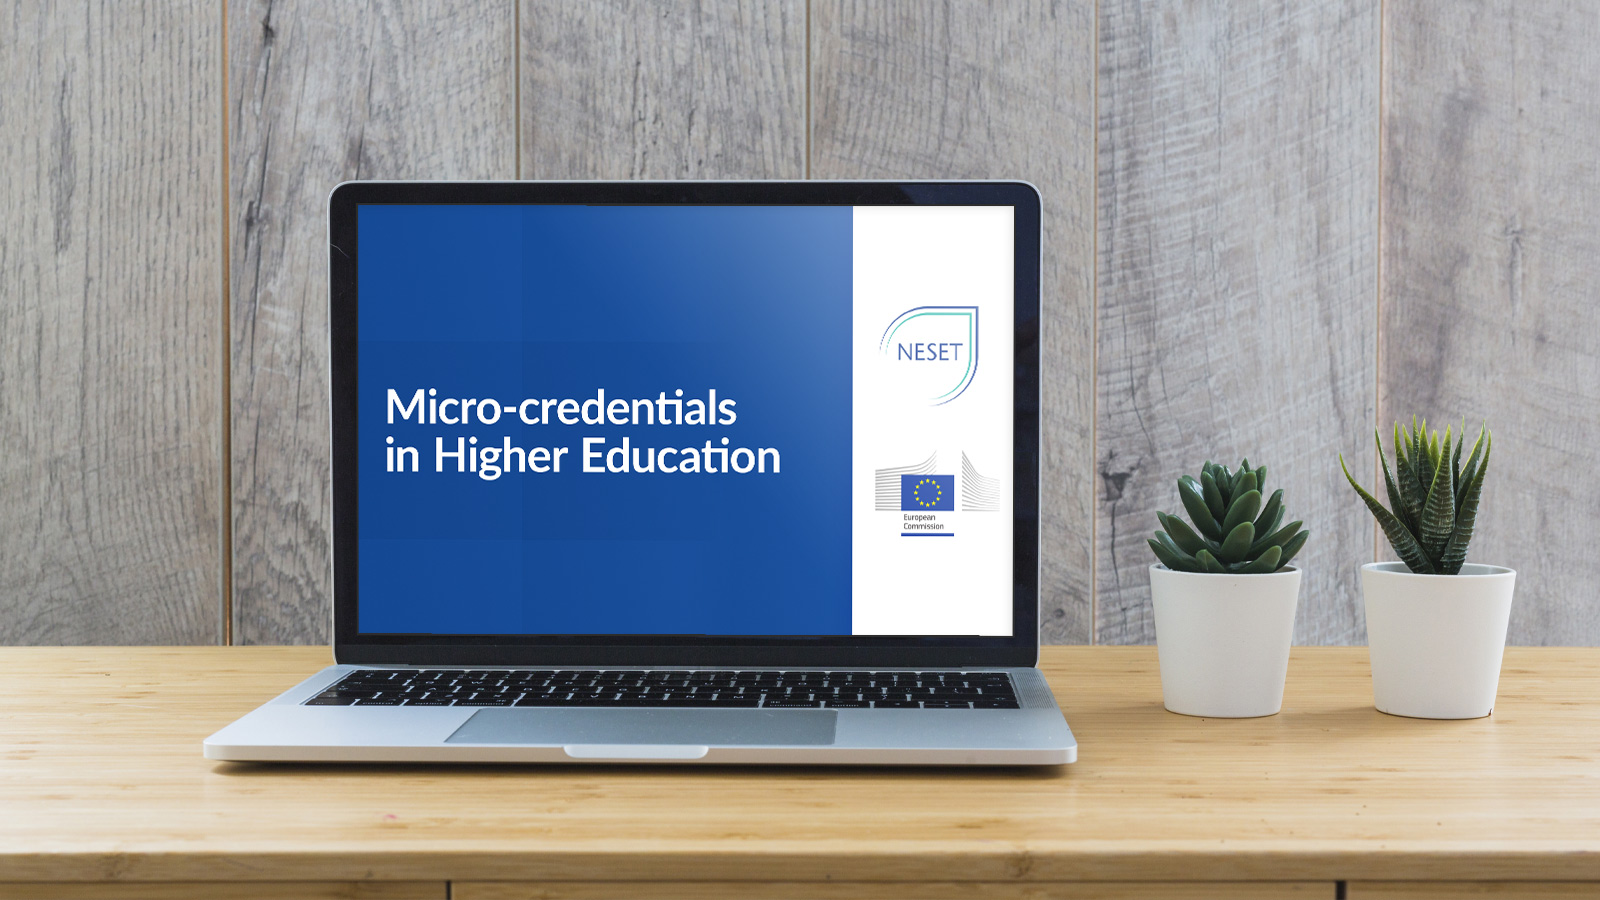 NESET research on micro-credentials presented at an education symposium